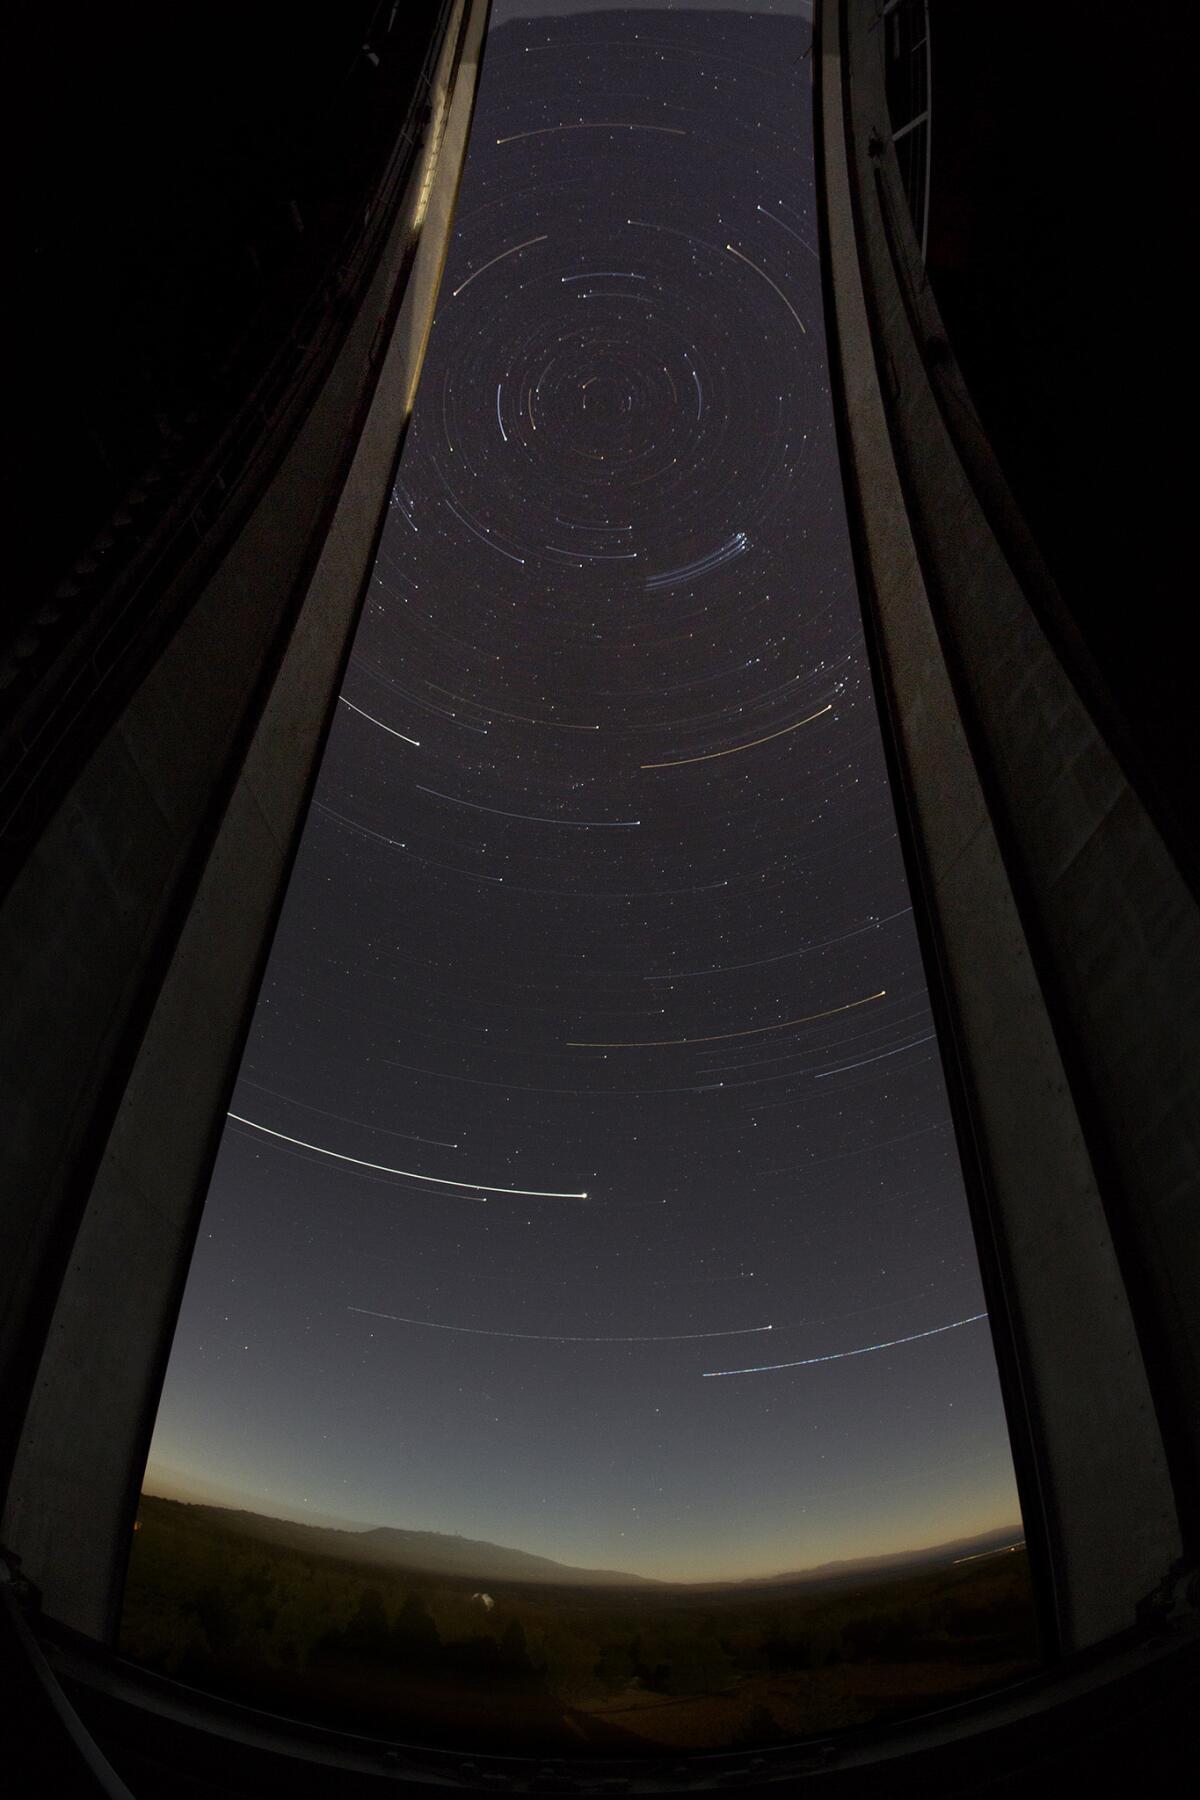 Stars in the southern sky appear as streaks during a 50-second exposure while the Palomar Observatory dome rotates.